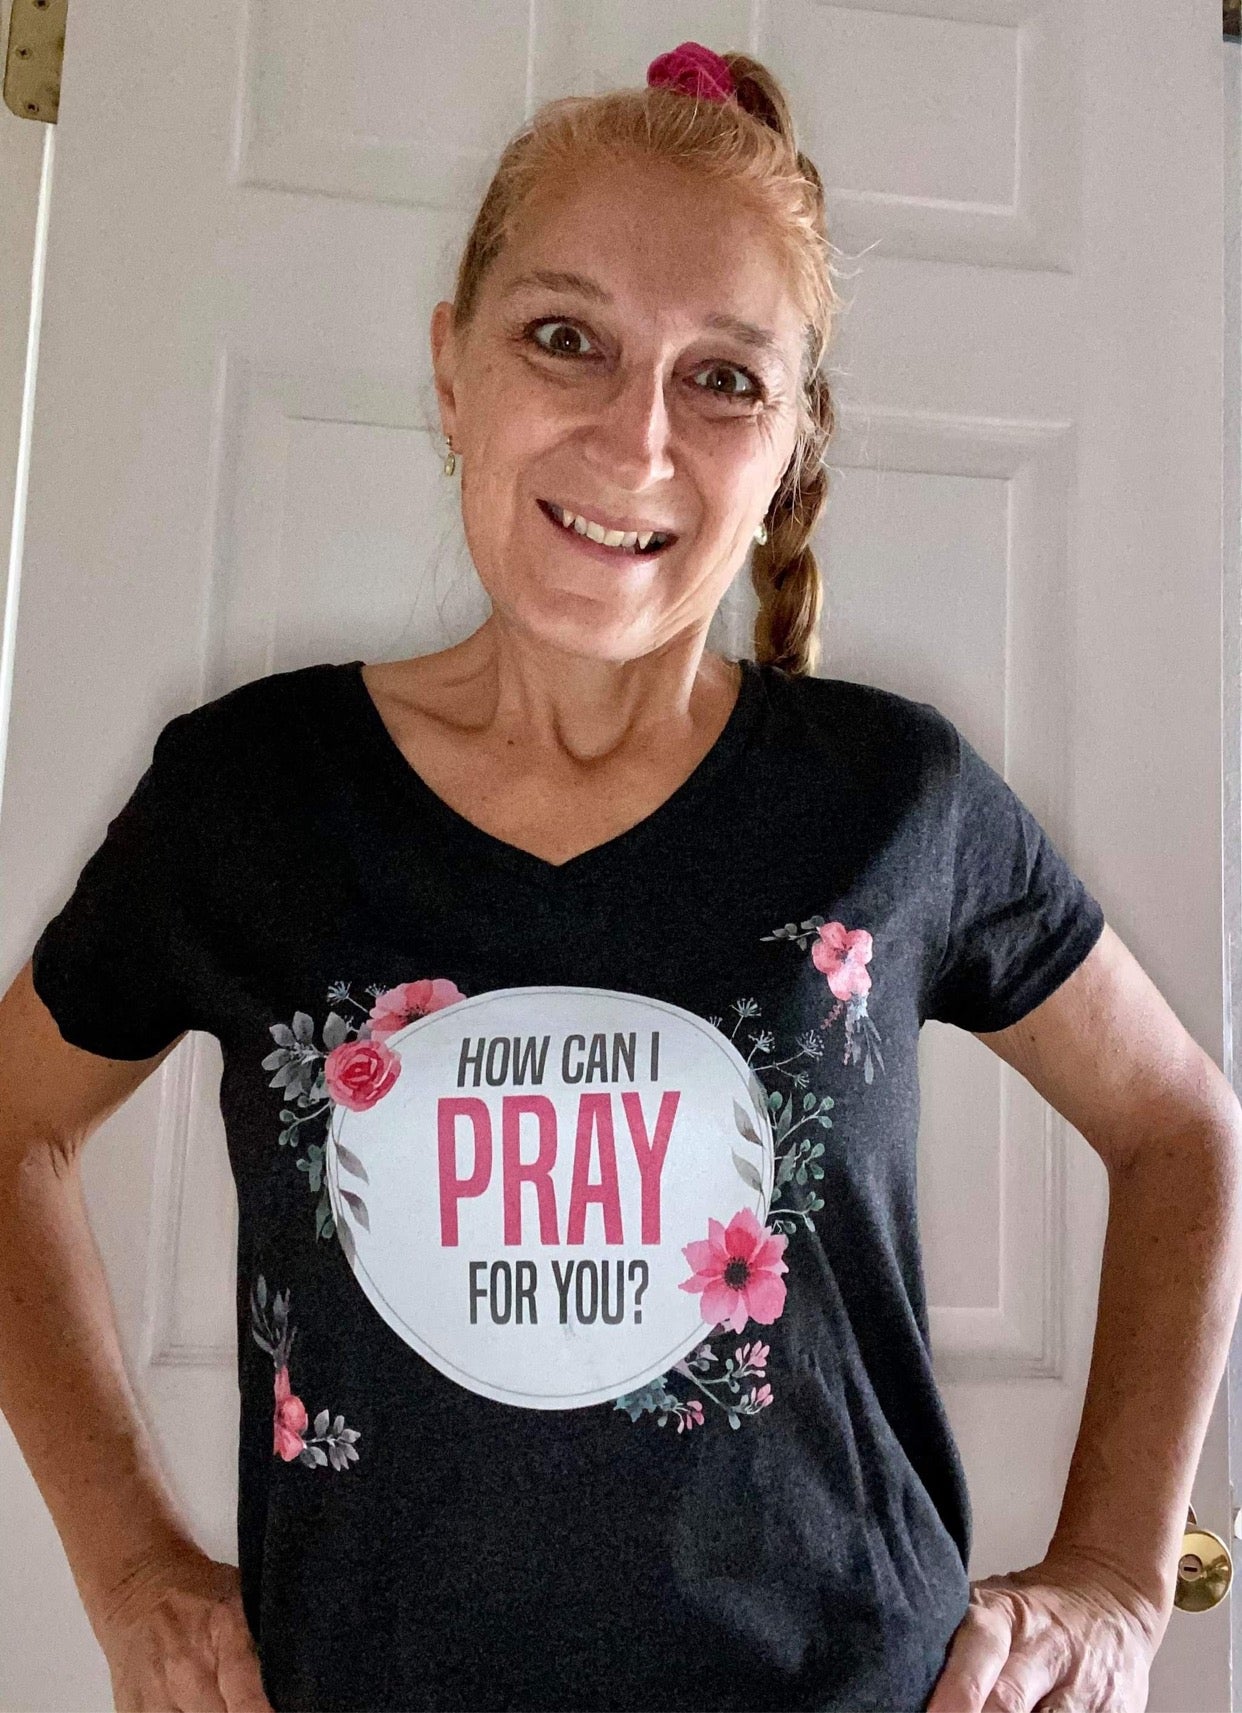 How Can I Pray For You? Women’s v-neck t-shirt